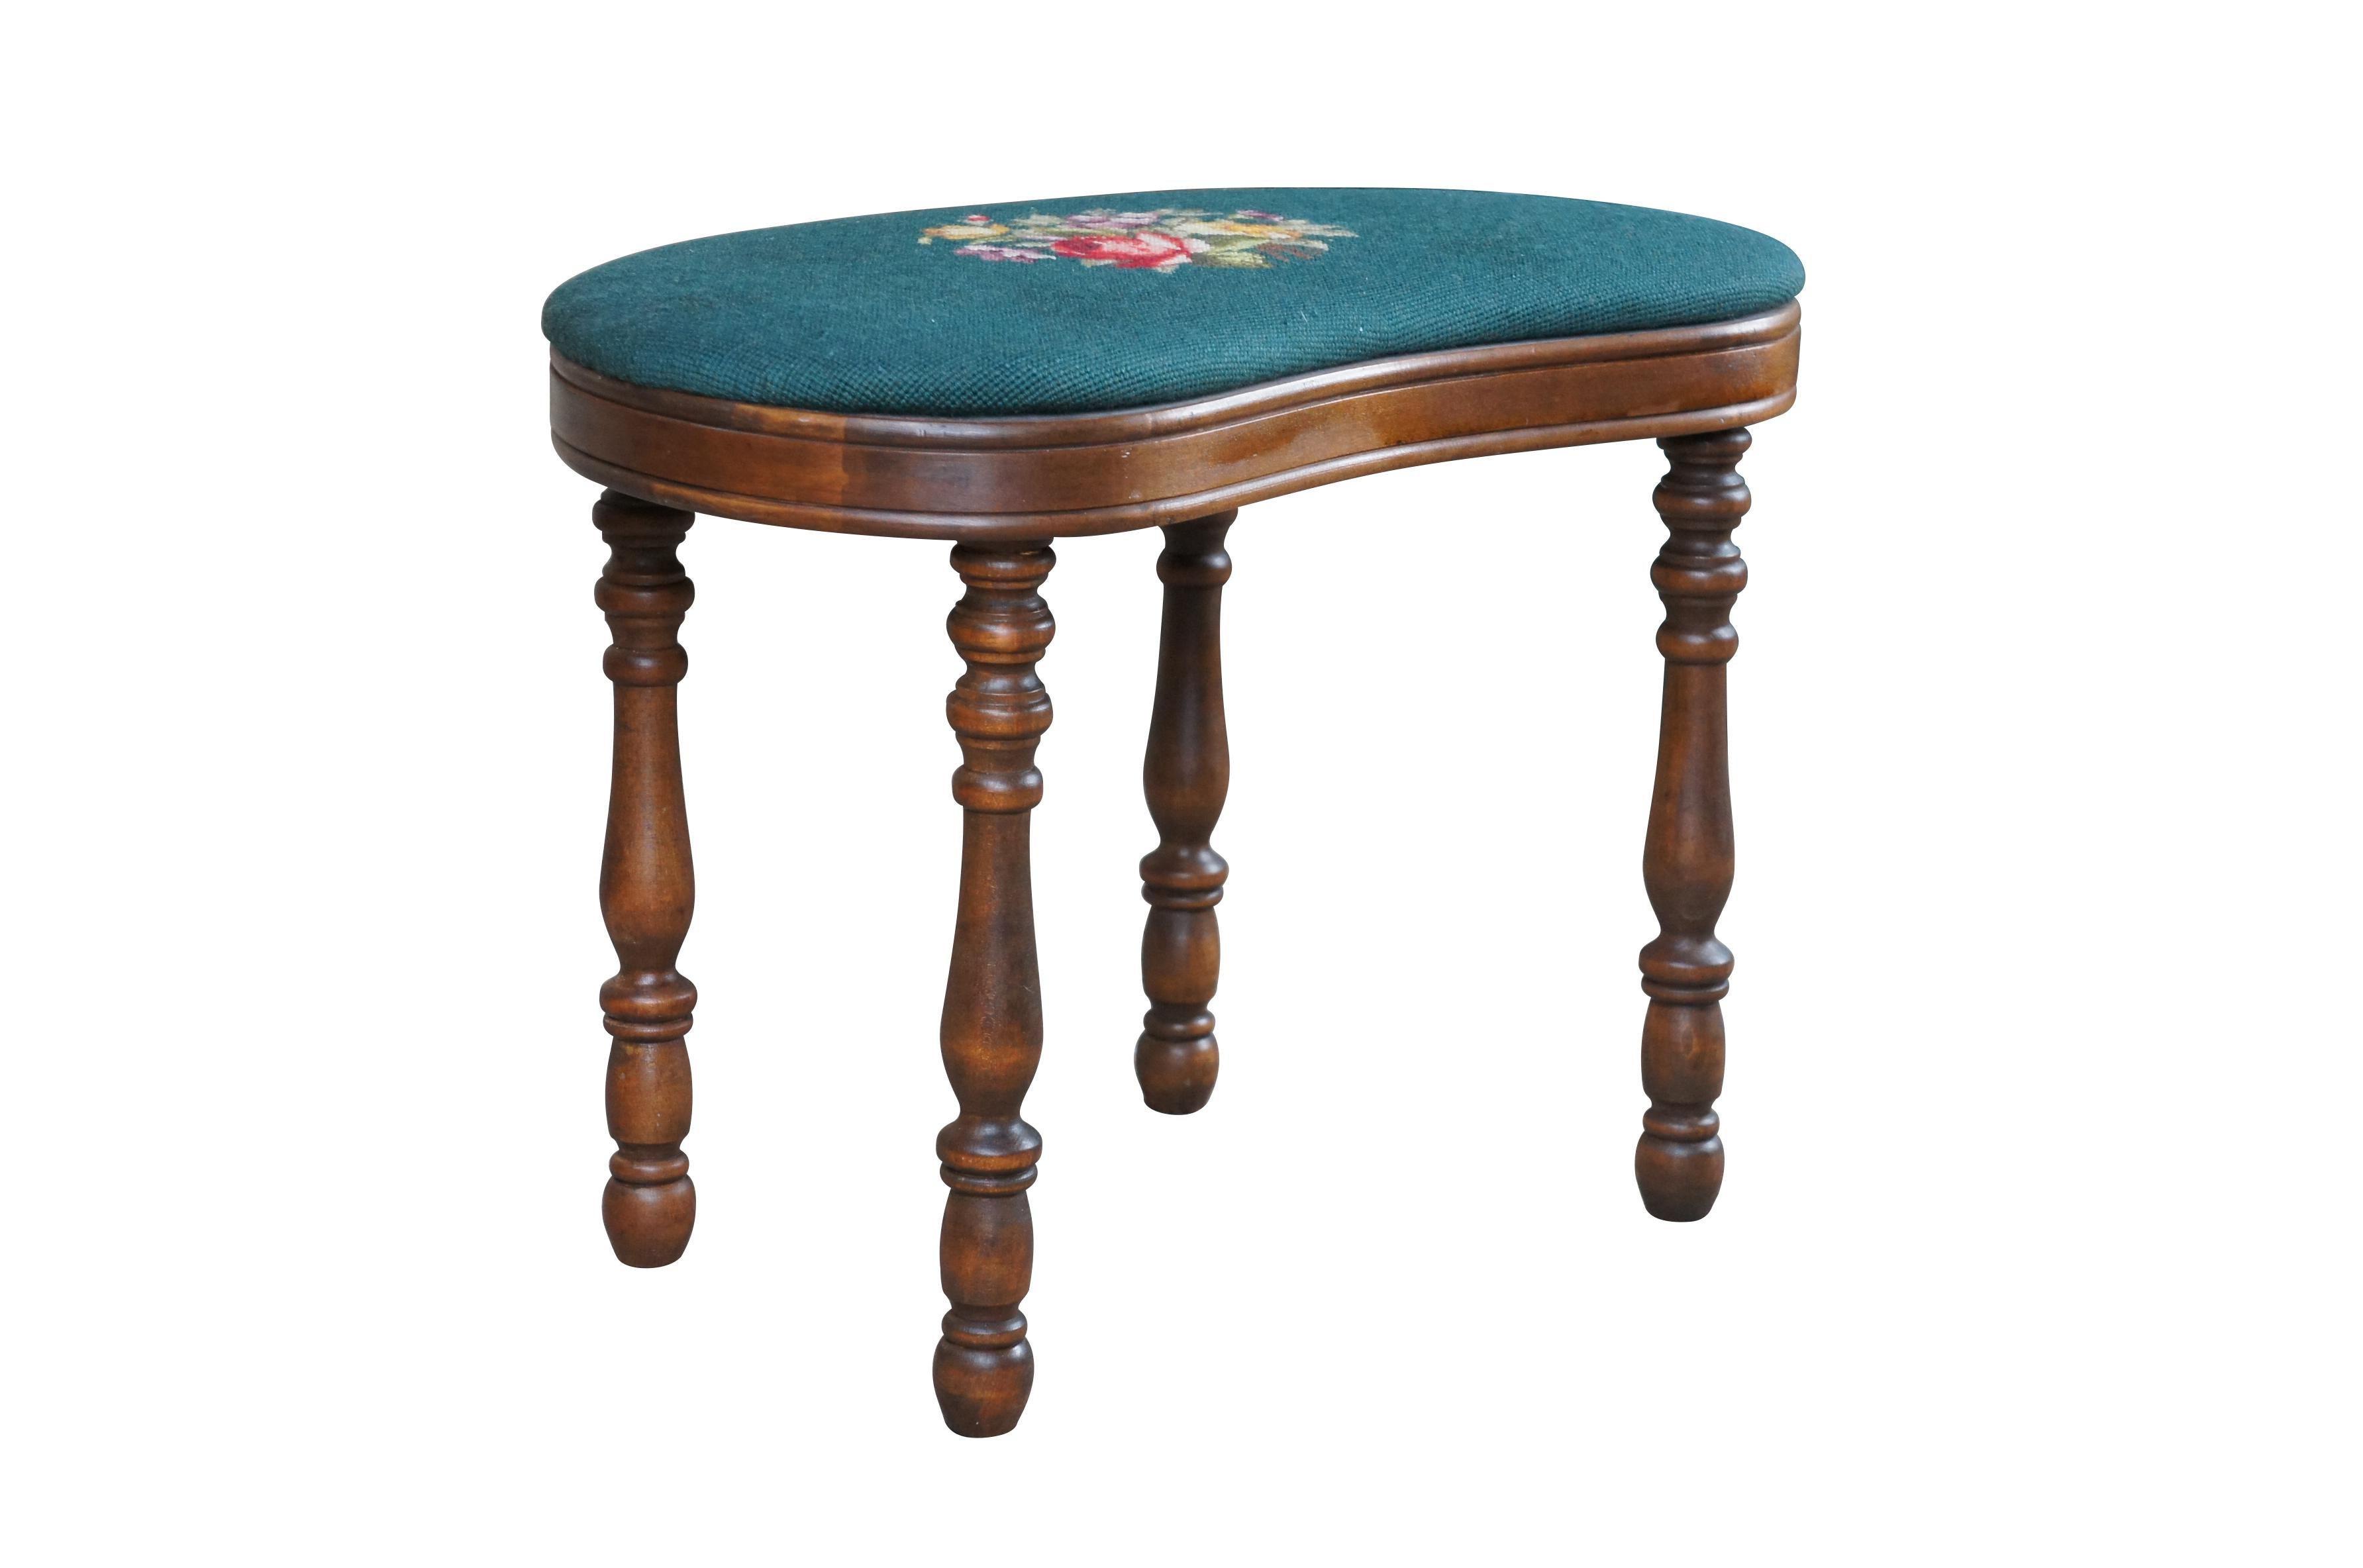 Mid 20th Century Kidney Bean Stool.  Made from walnut with needlepoint embroidered seat.  


Dimensions:
22.5